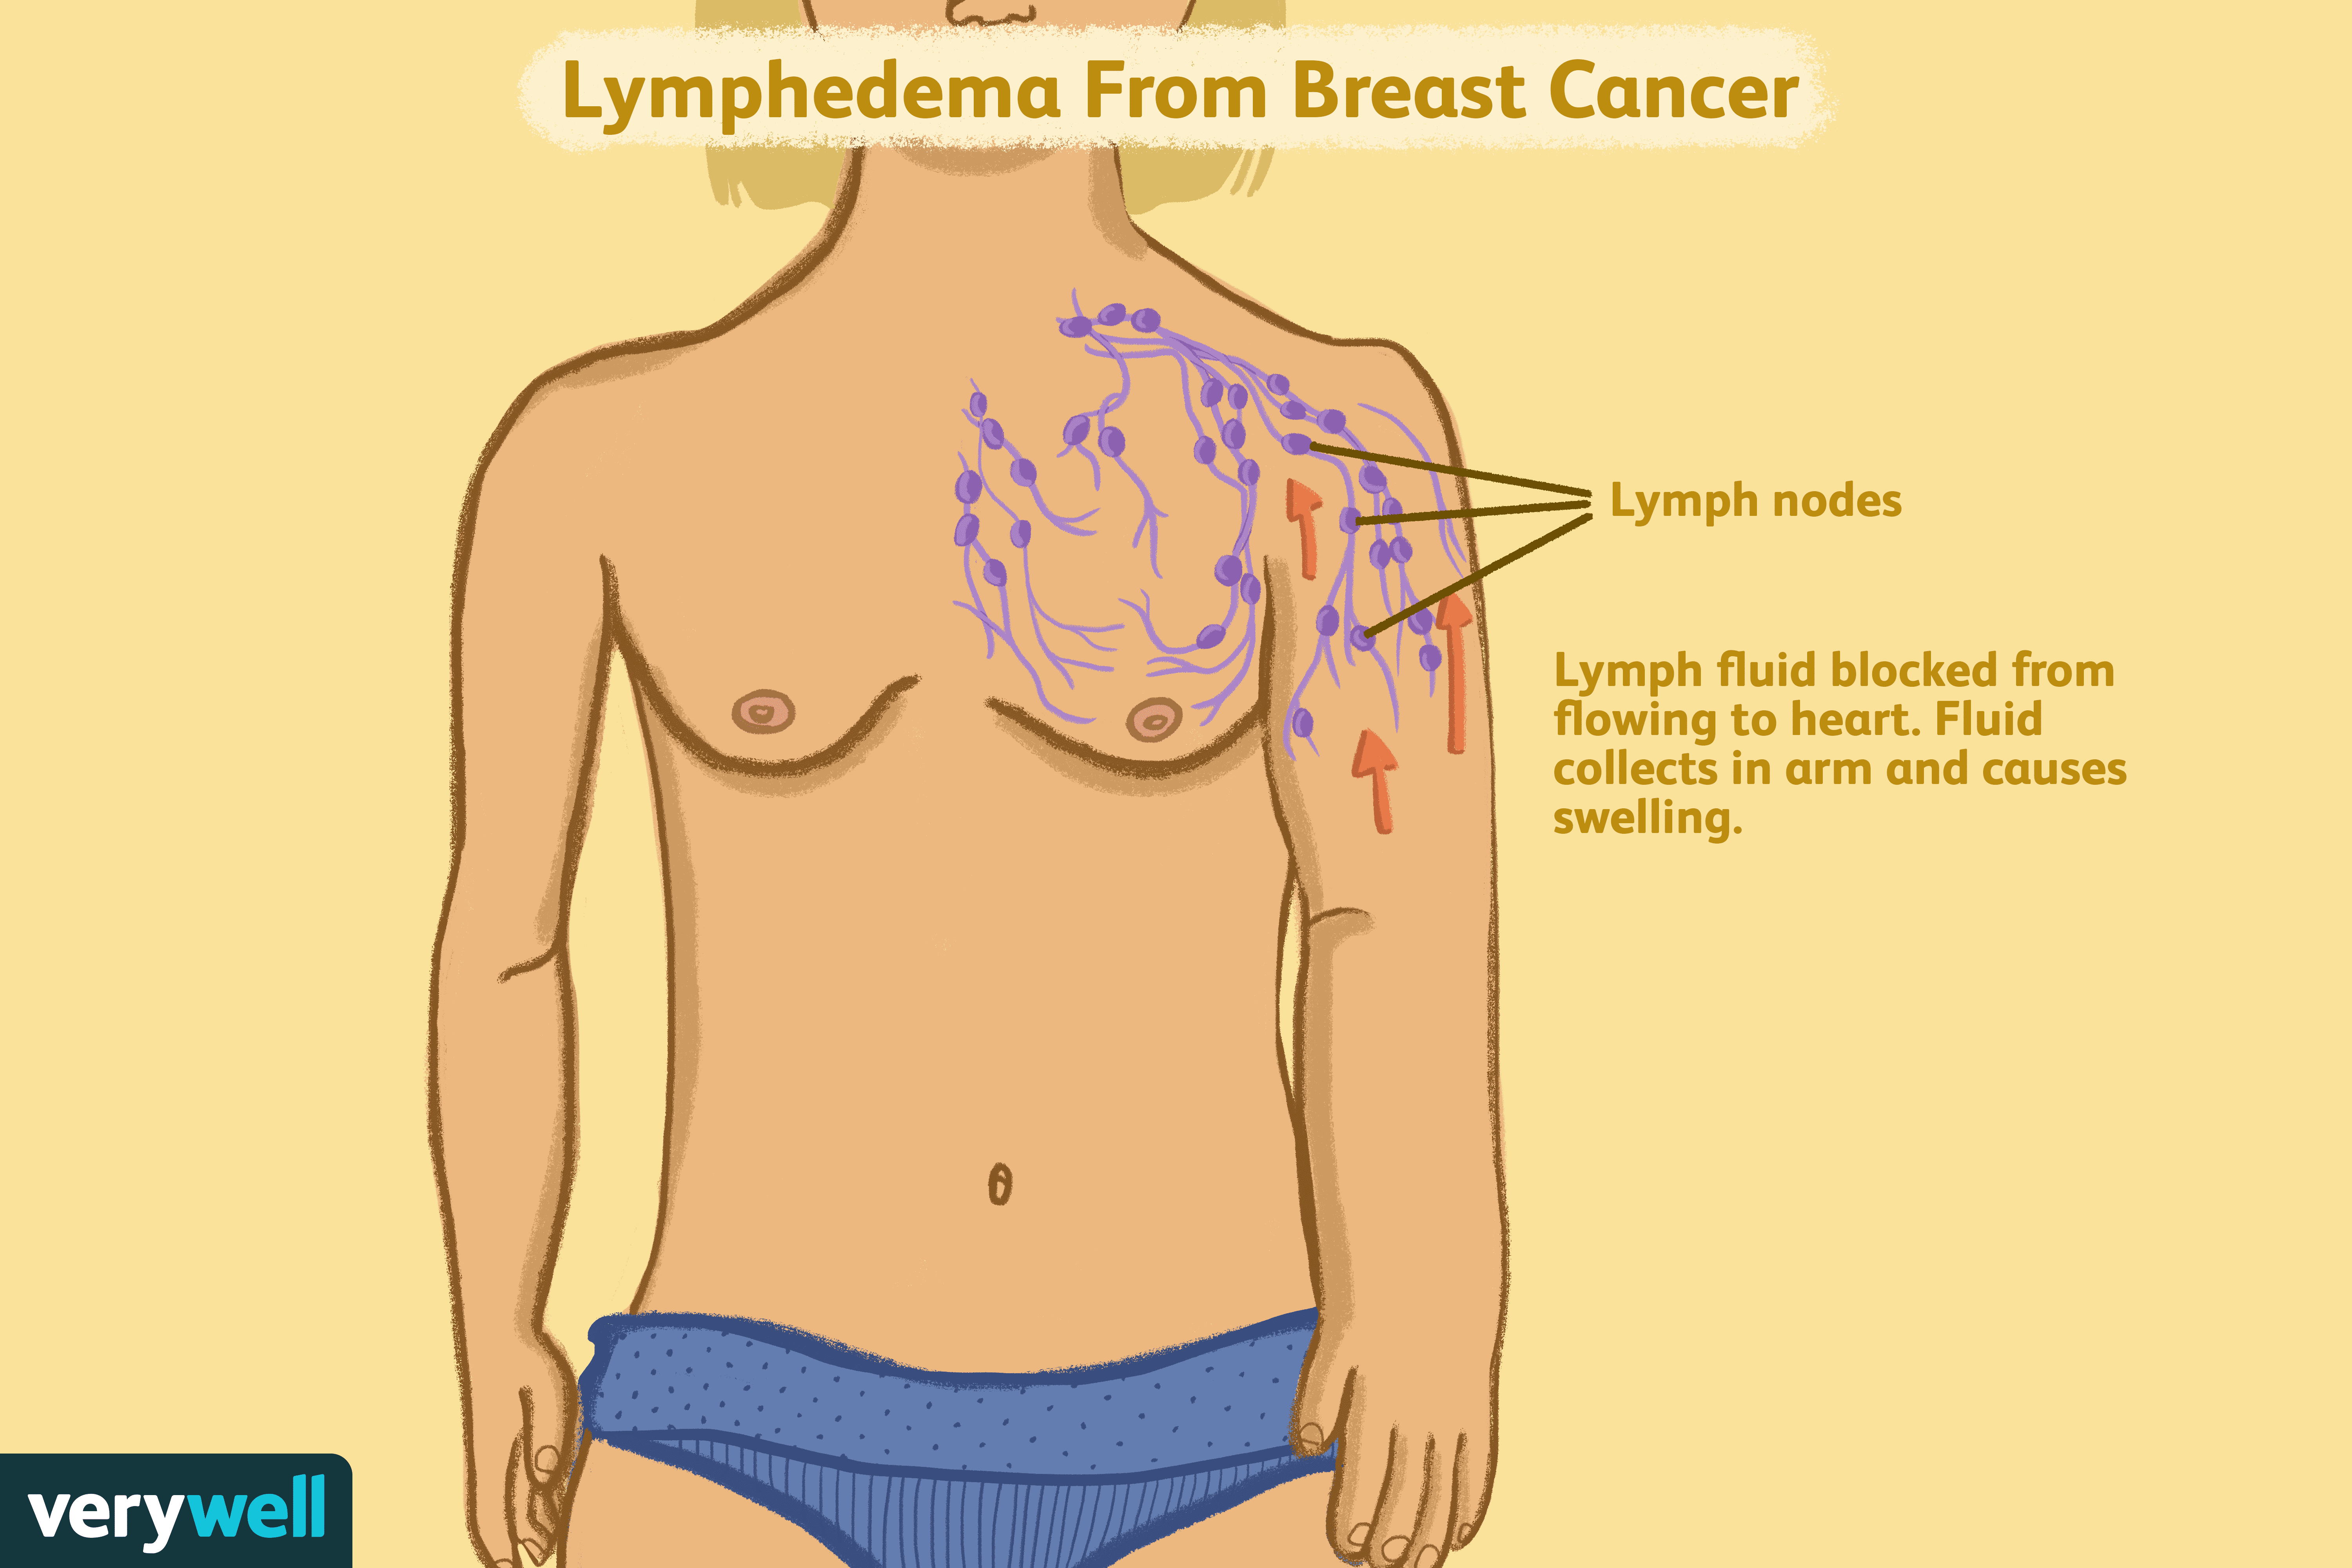 Lymphedema in Breast Cancer: Symptoms, Causes, Diagnosis, and Treatment